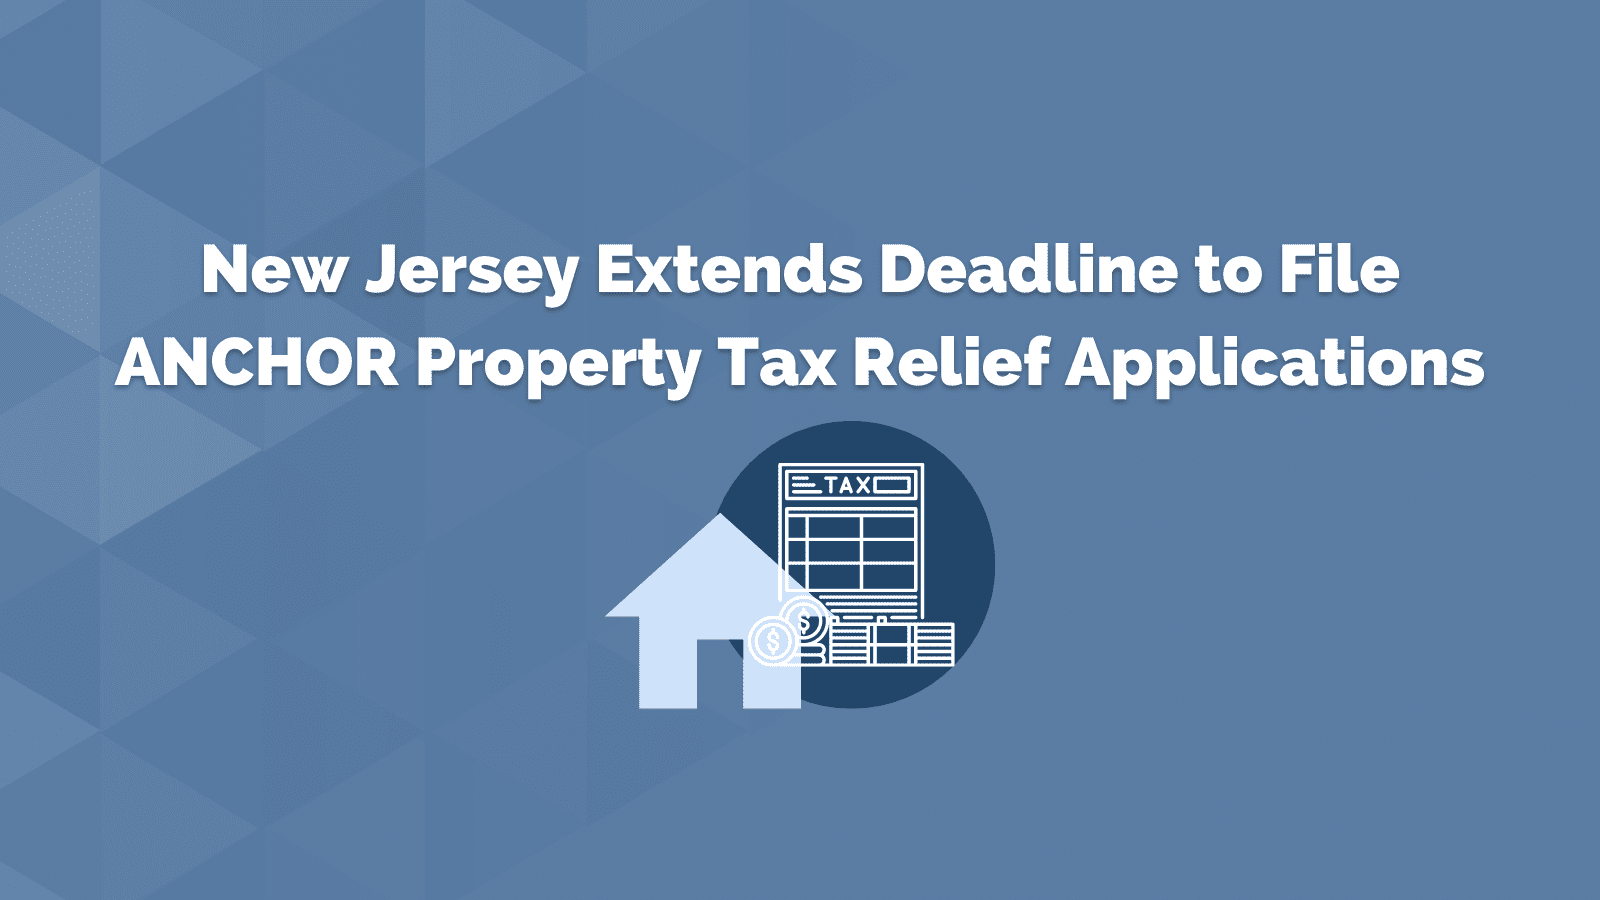 New Jersey Extends Deadline to File ANCHOR Property Tax Relief